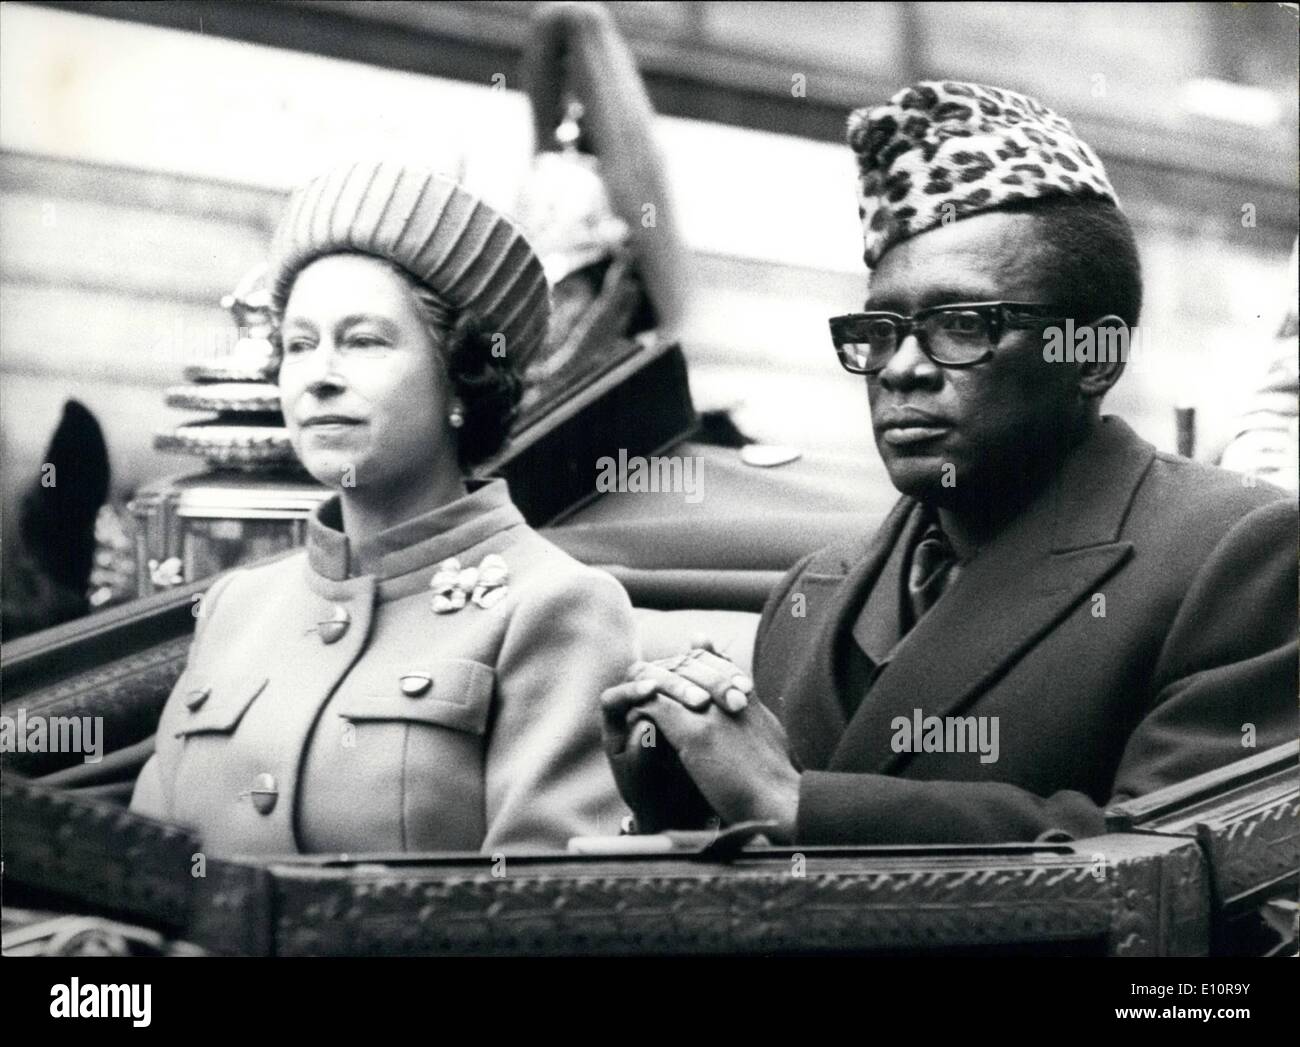 Dec. 12, 1973 - President Mobutu Arrives On State Visit: President Mbutu of Zaire and Madame Mobutu arrived in London today as a State Visit. Photo shows: H.M. The Queen driving with president Mobutu on the way to Buckingham palace, after the President's arrival at Victoria Station. Stock Photo